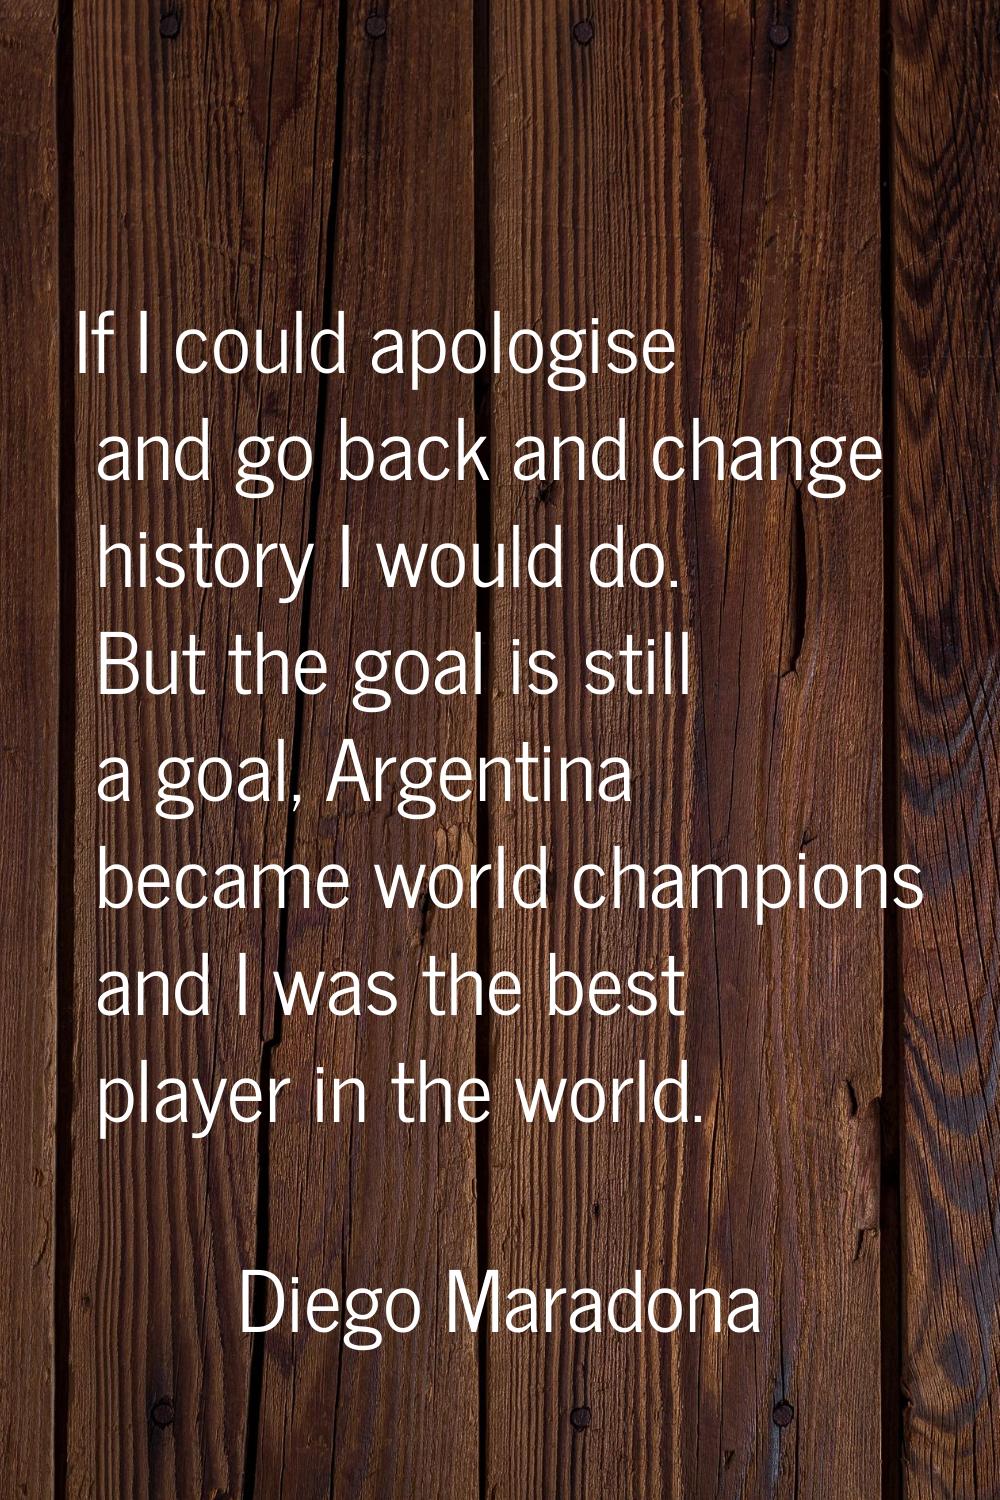 If I could apologise and go back and change history I would do. But the goal is still a goal, Argen